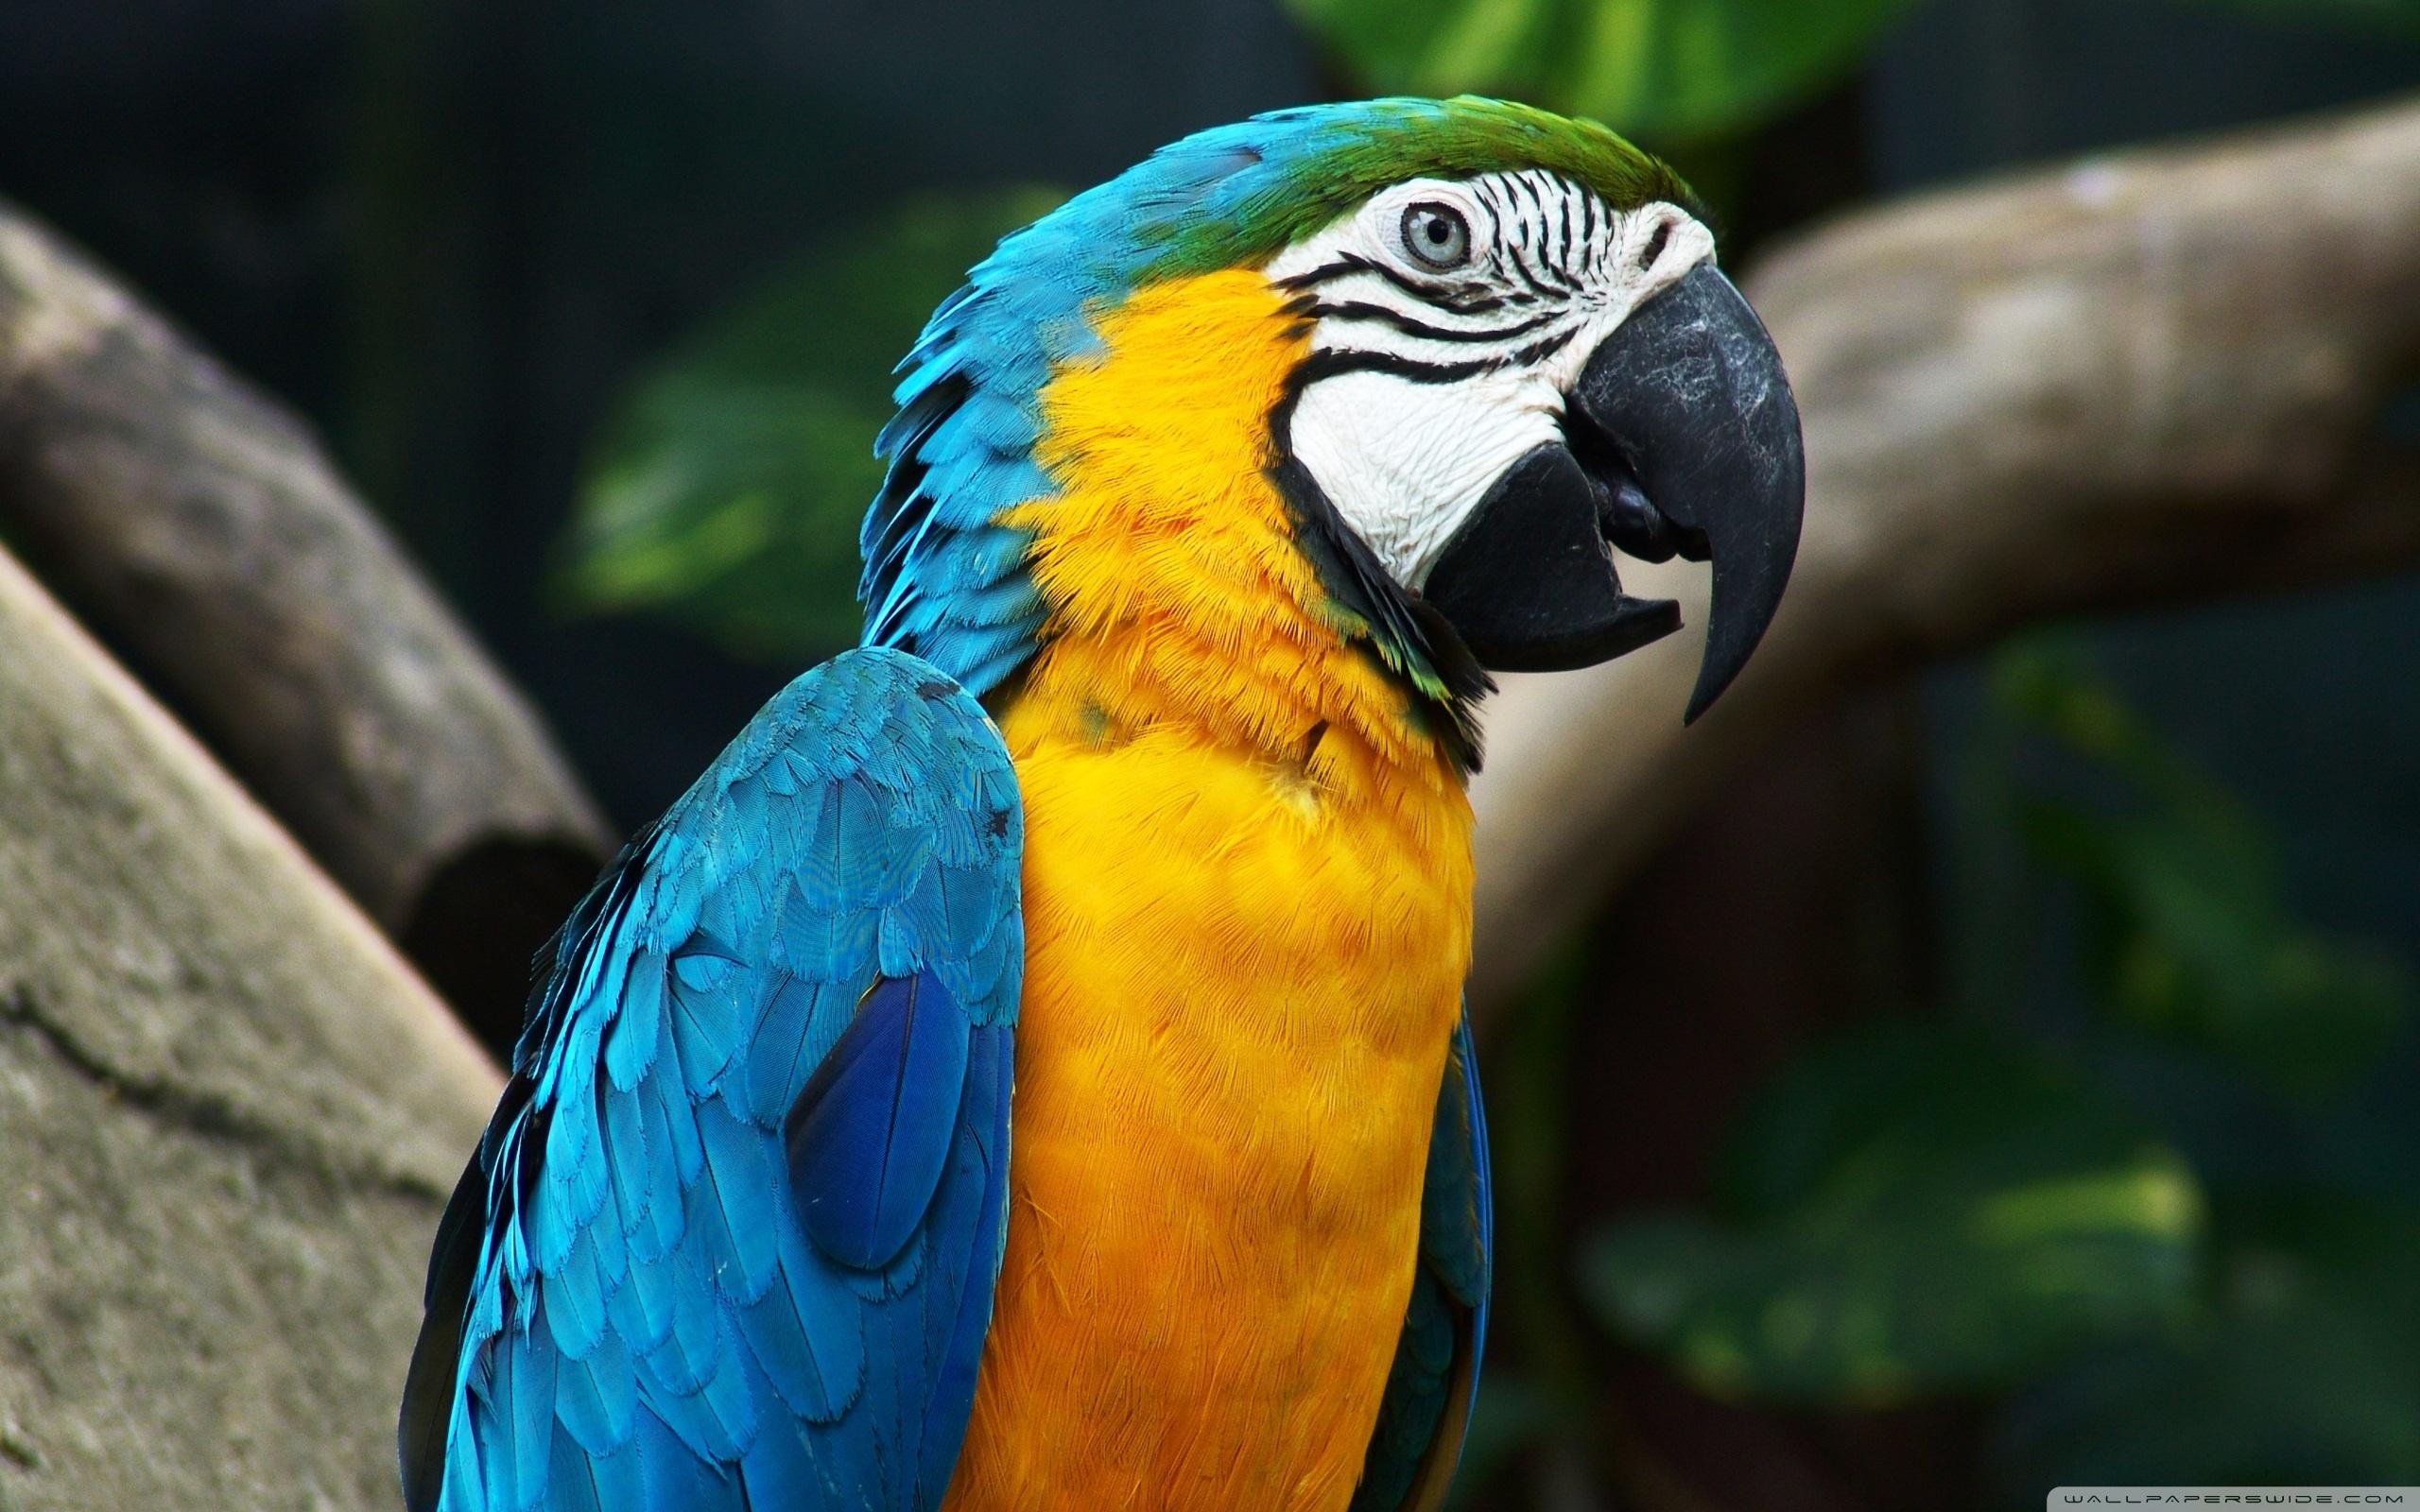 Download wallpaper 938x1668 macaw parrot bird color beak iphone  876s6 for parallax hd background